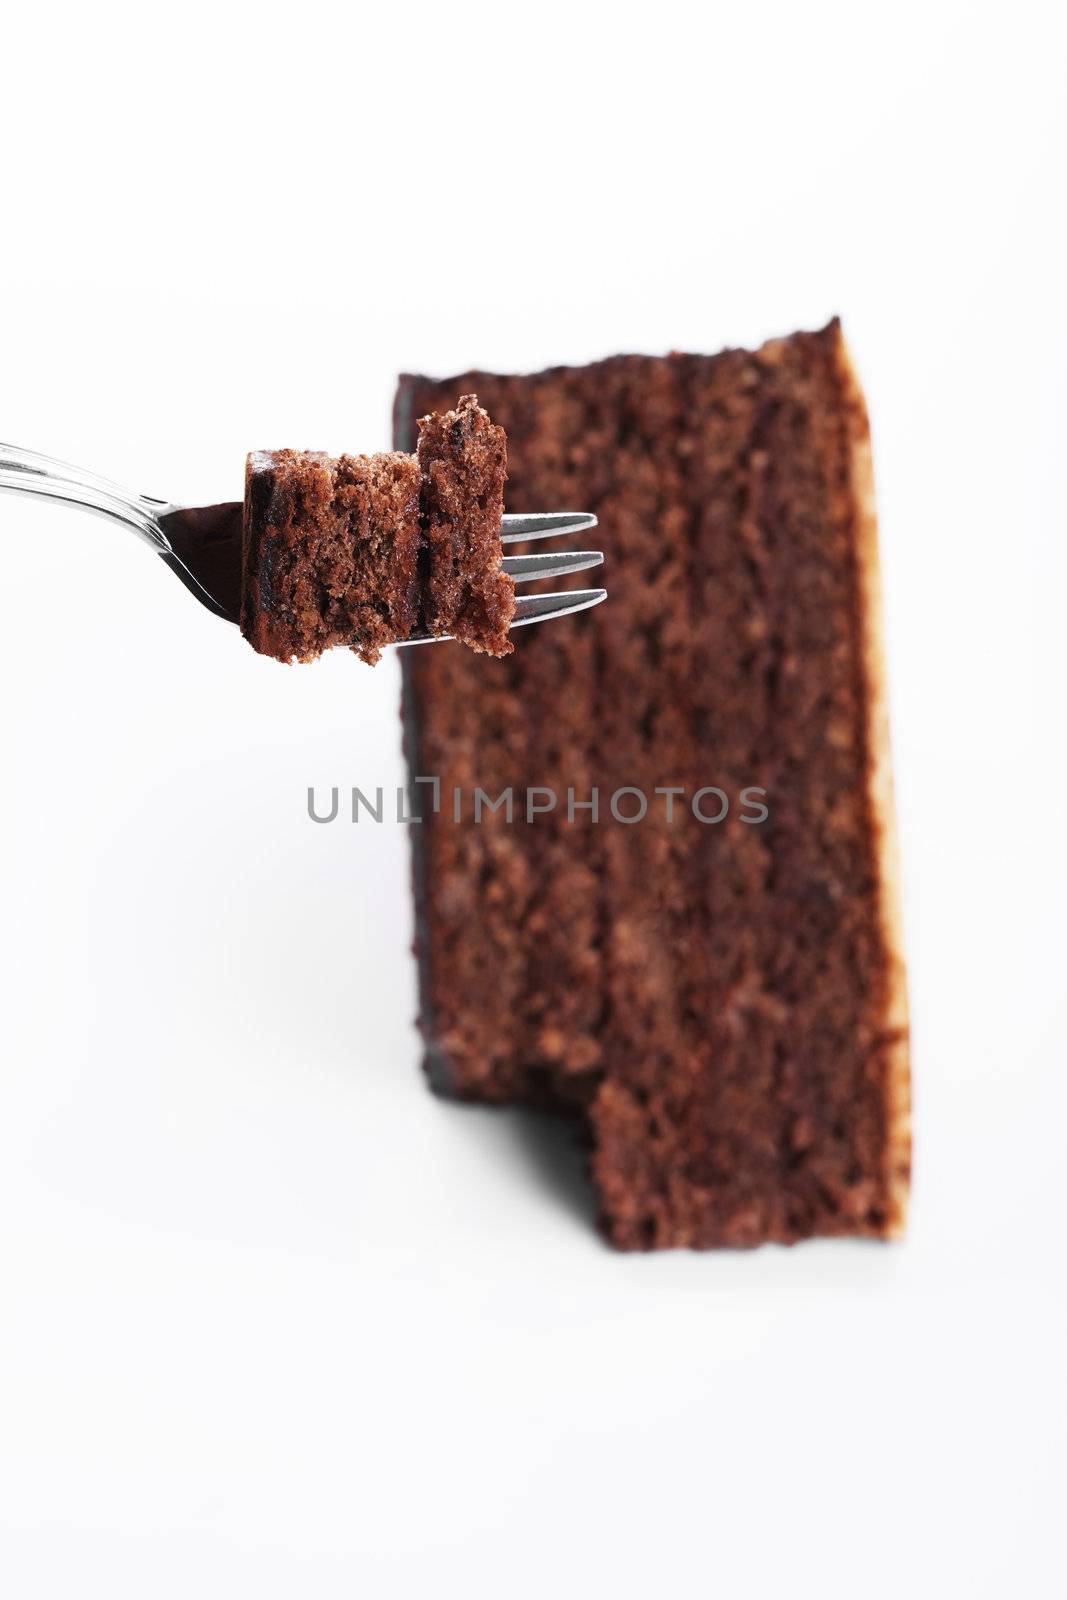 piece of a chocolate cake on a fork by RobStark